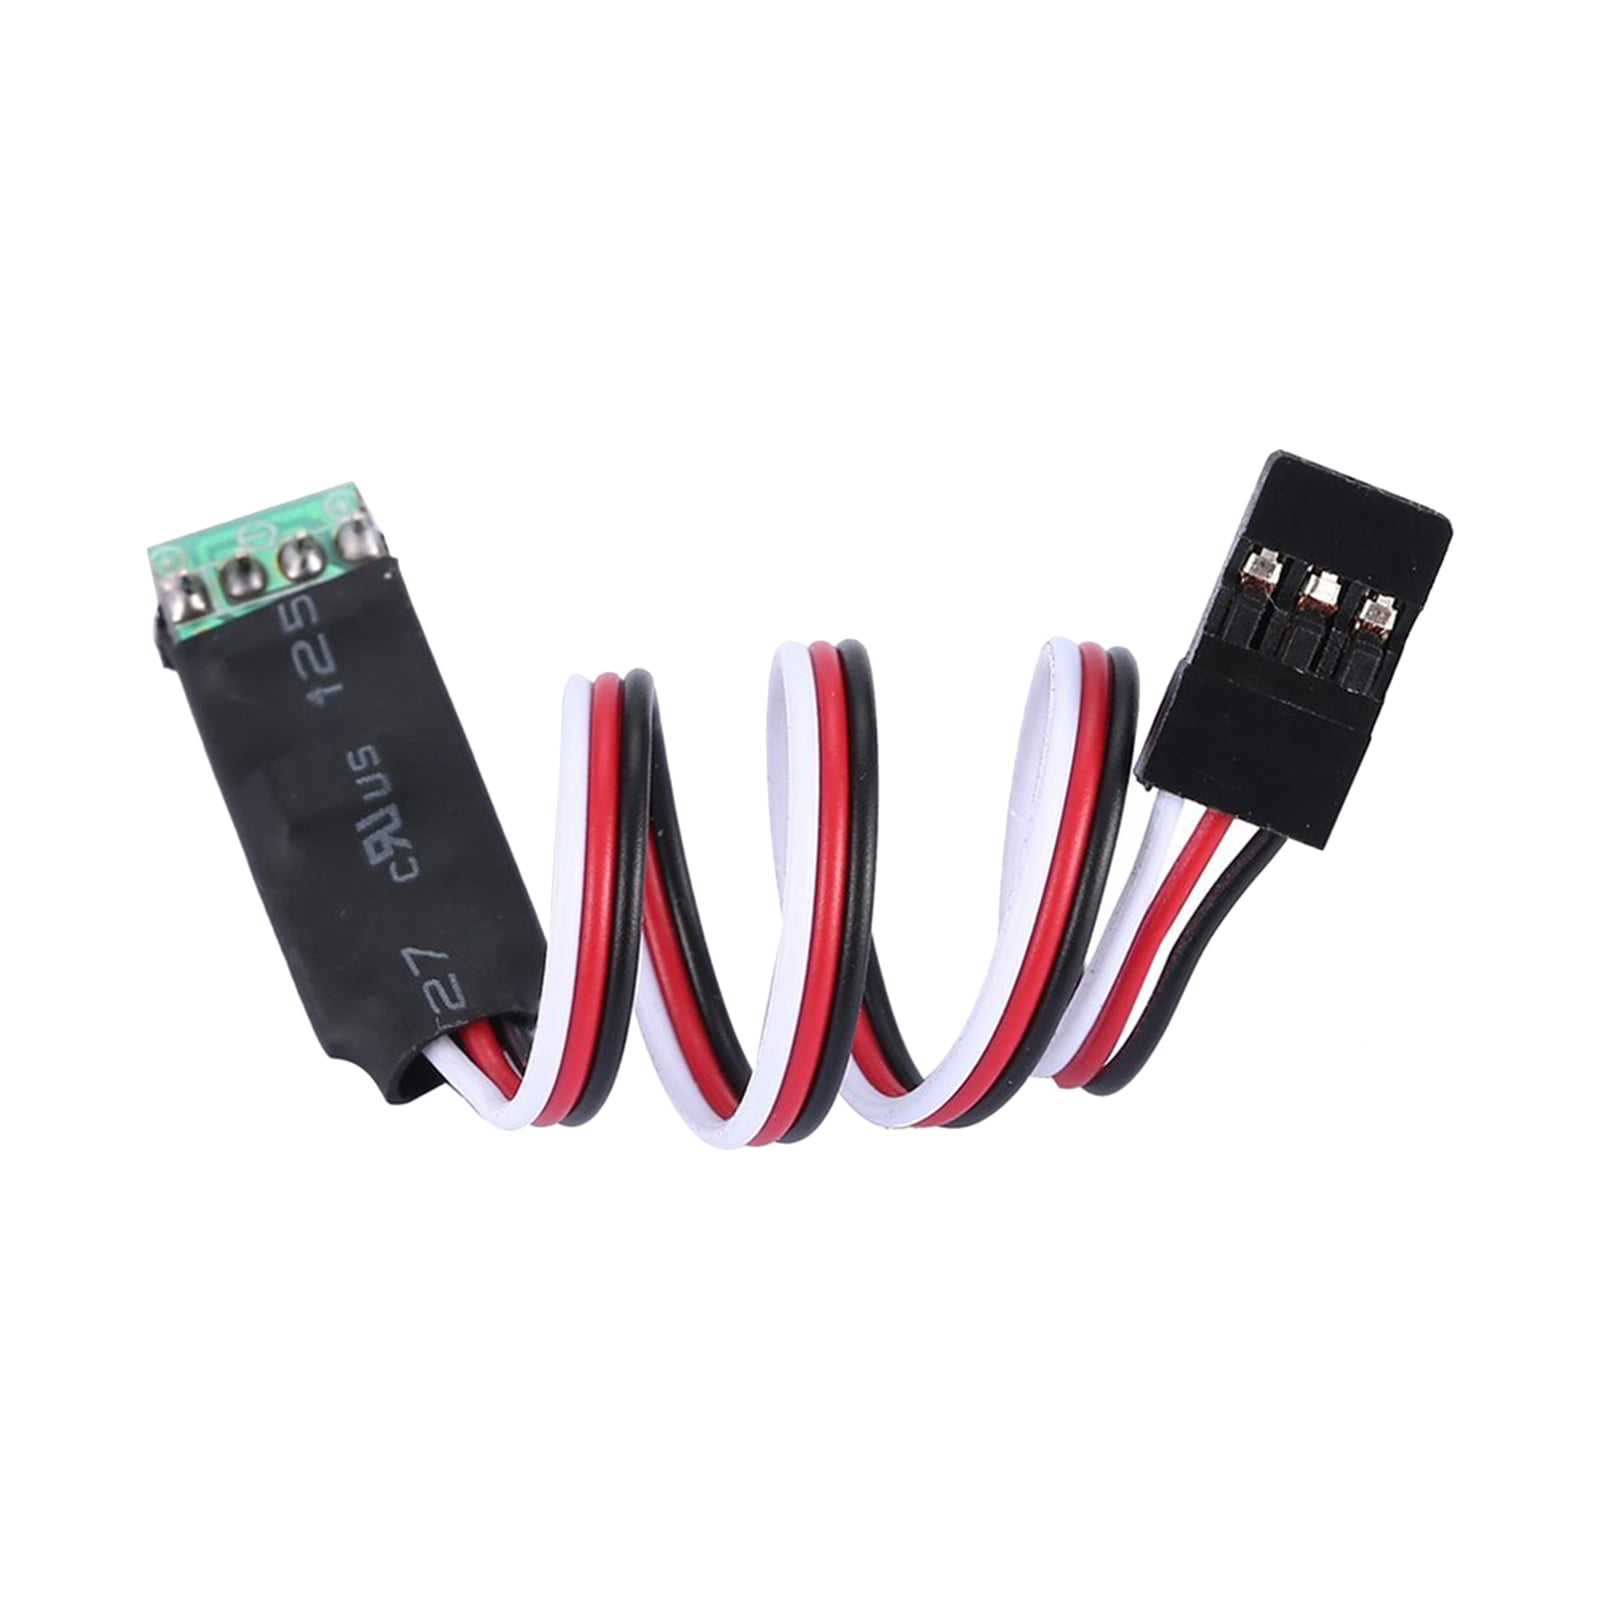 Axial CH3 LED Light Controller System for 1/12 1/10 1/8 1/5 RC Car Axial Scx10 